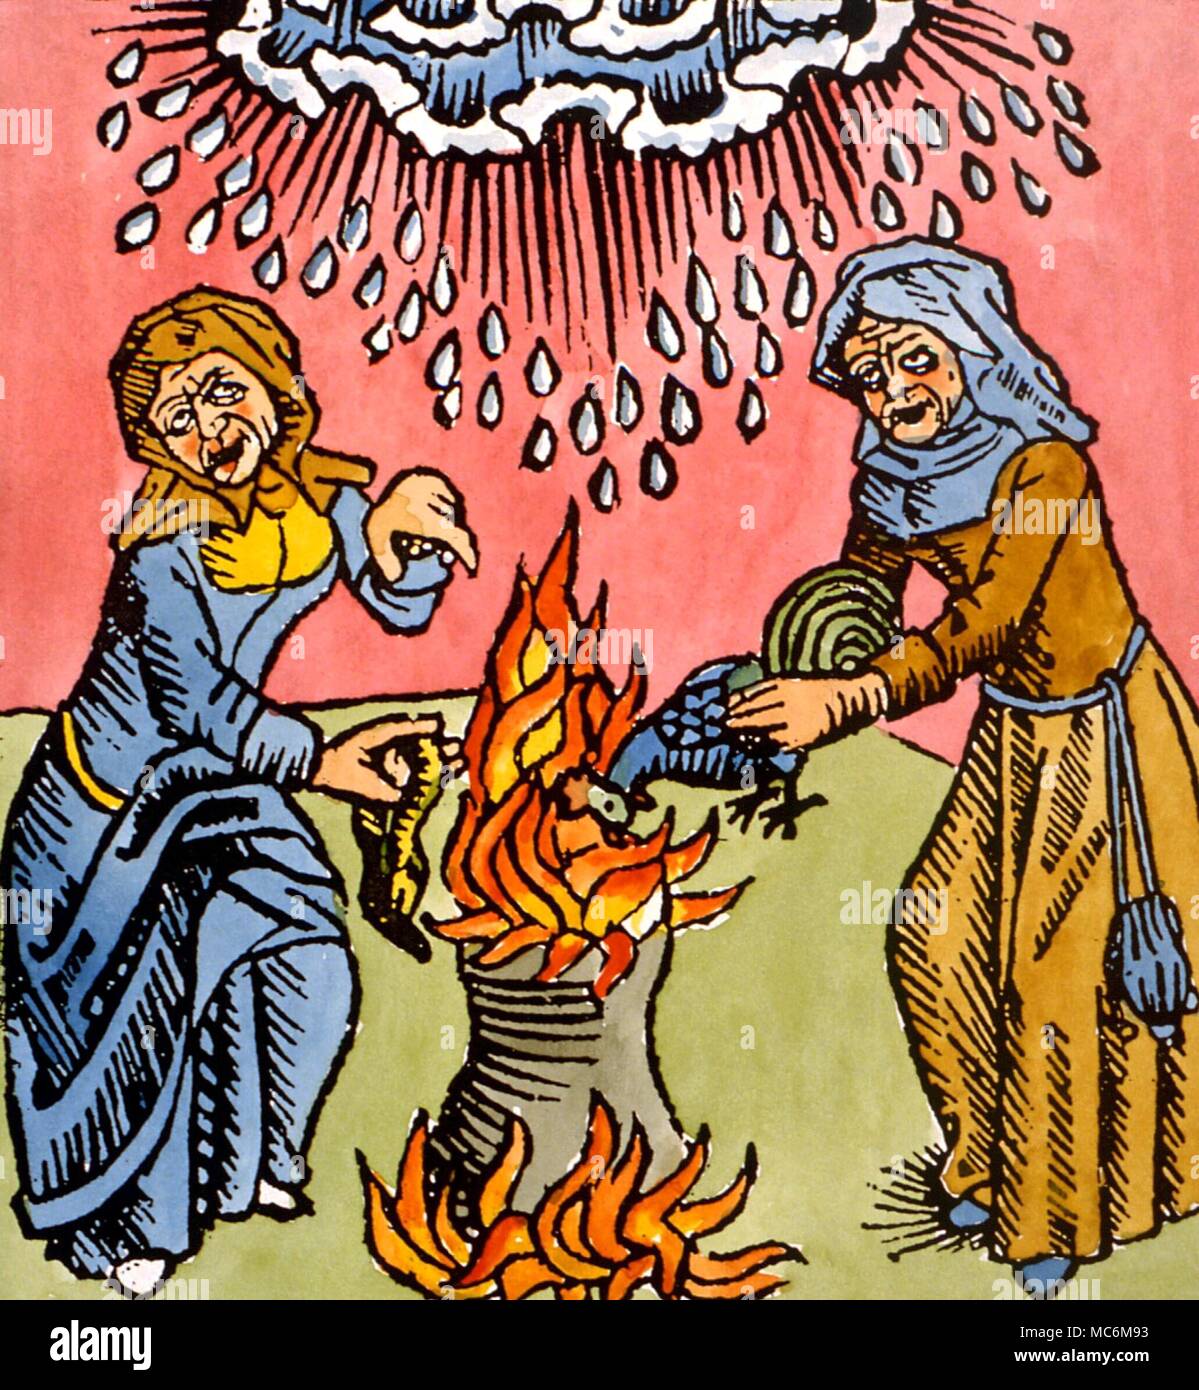 WITCHCRAFT - Witches incantating around a cauldron, sacrificing various animals and birds, in order to make rain. From Ulrich Molitor De Lamiis et phitonicis mulieribus, 1489 Stock Photo